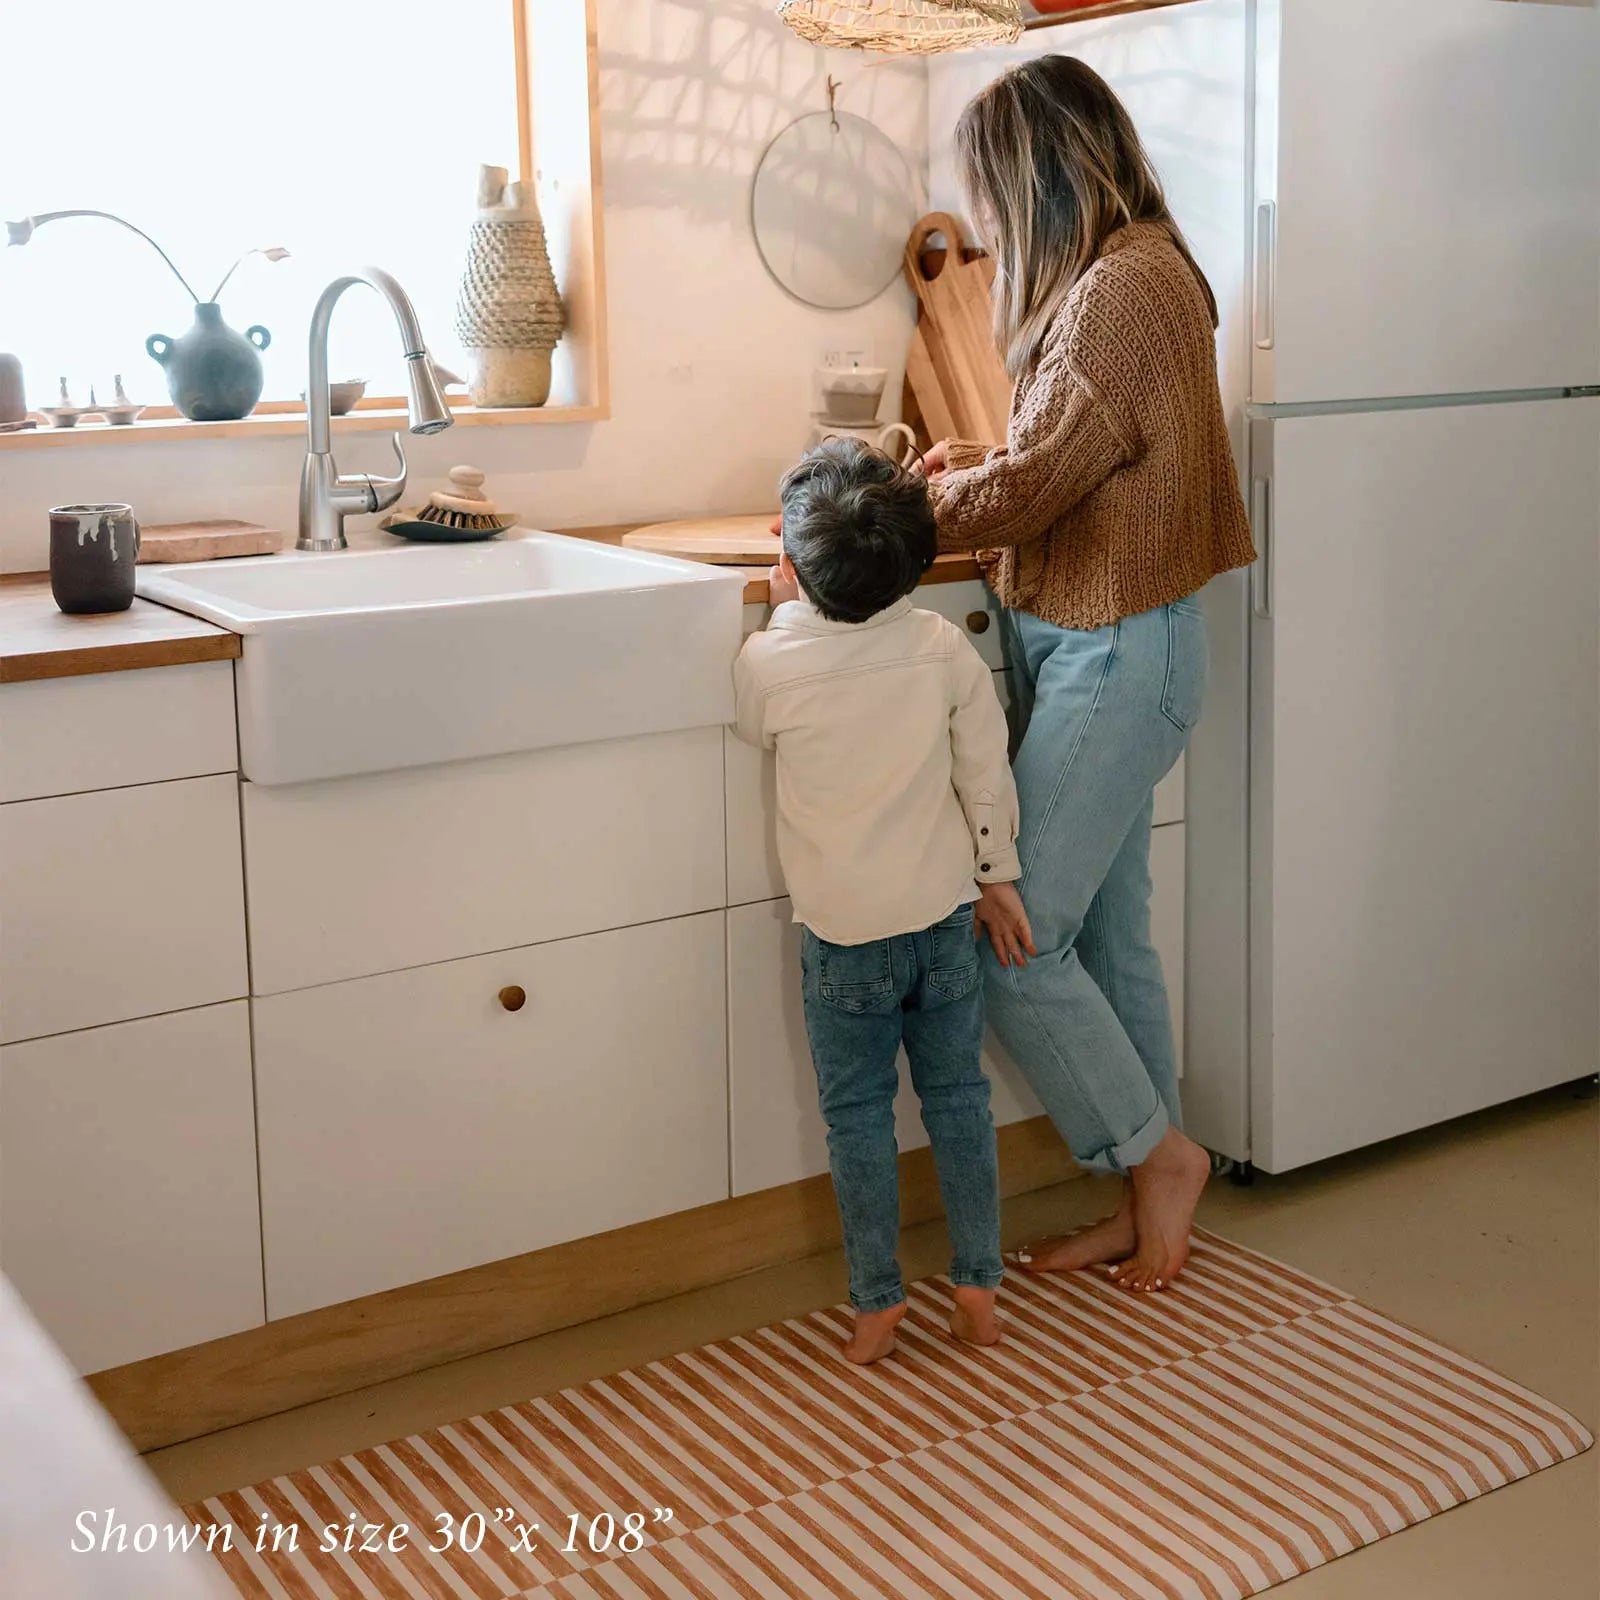 Reese terracotta brown and white inverted stripe standing mat shown in kitchen in size 30x108 with Mom and son cooking